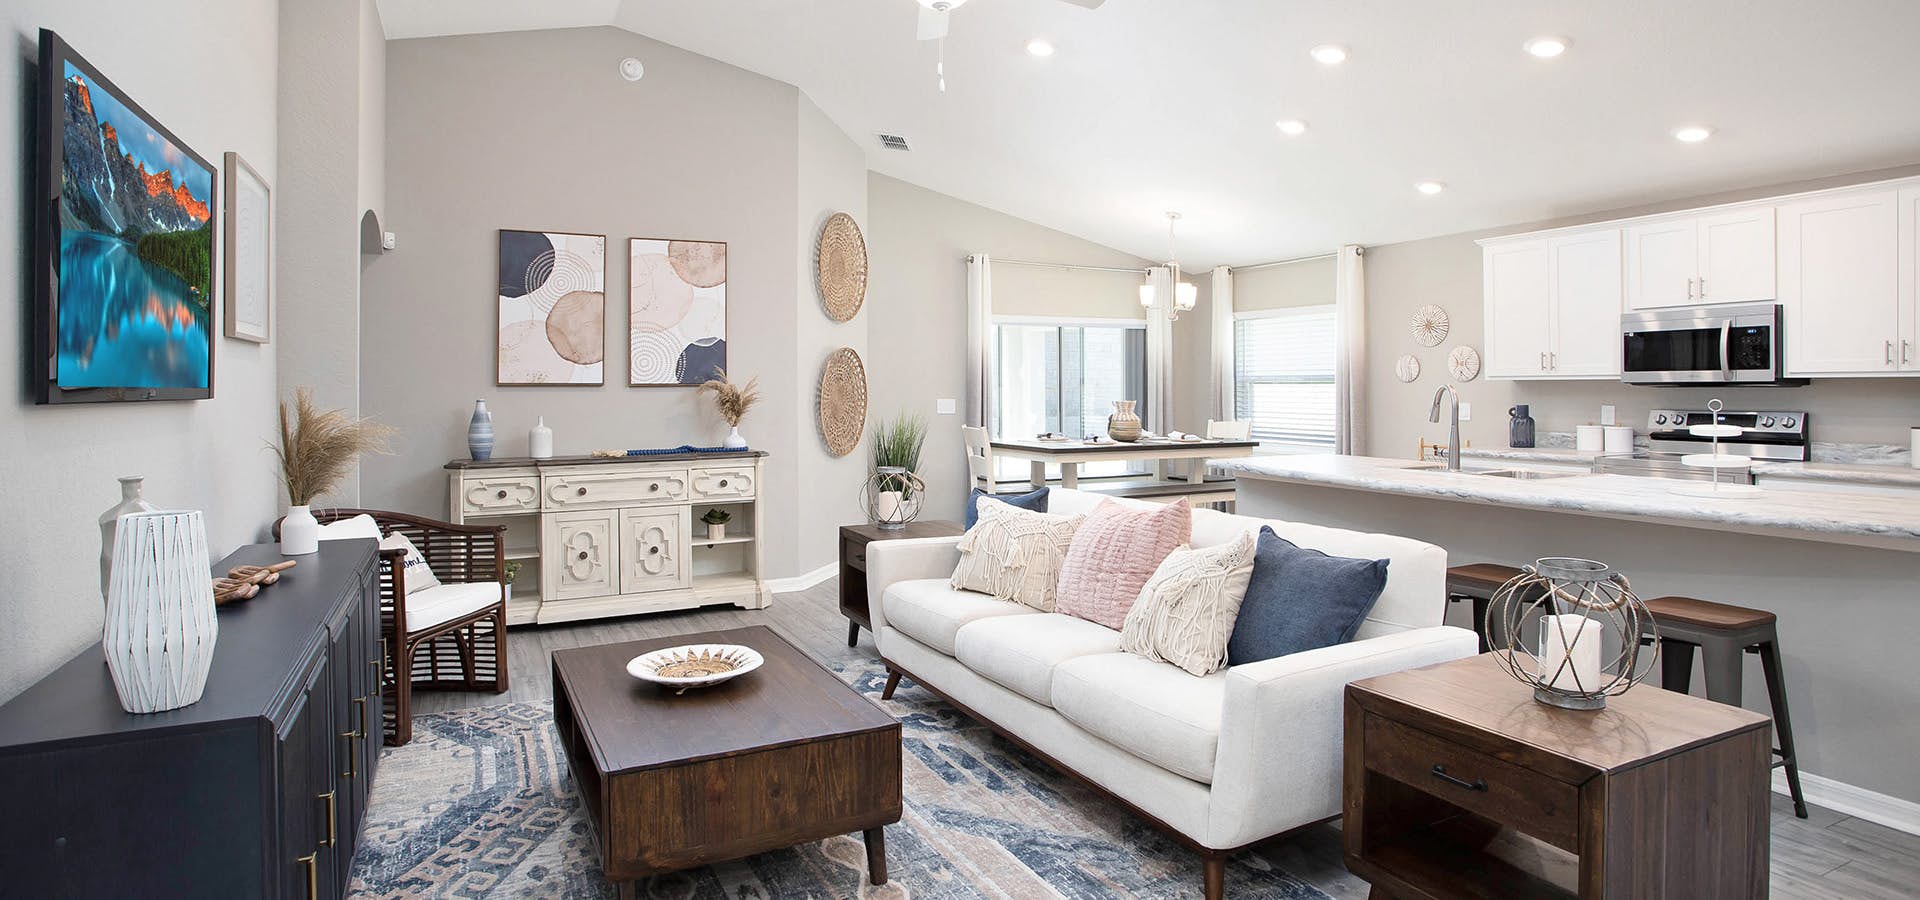 A new home in Davenport with a bright, open living area